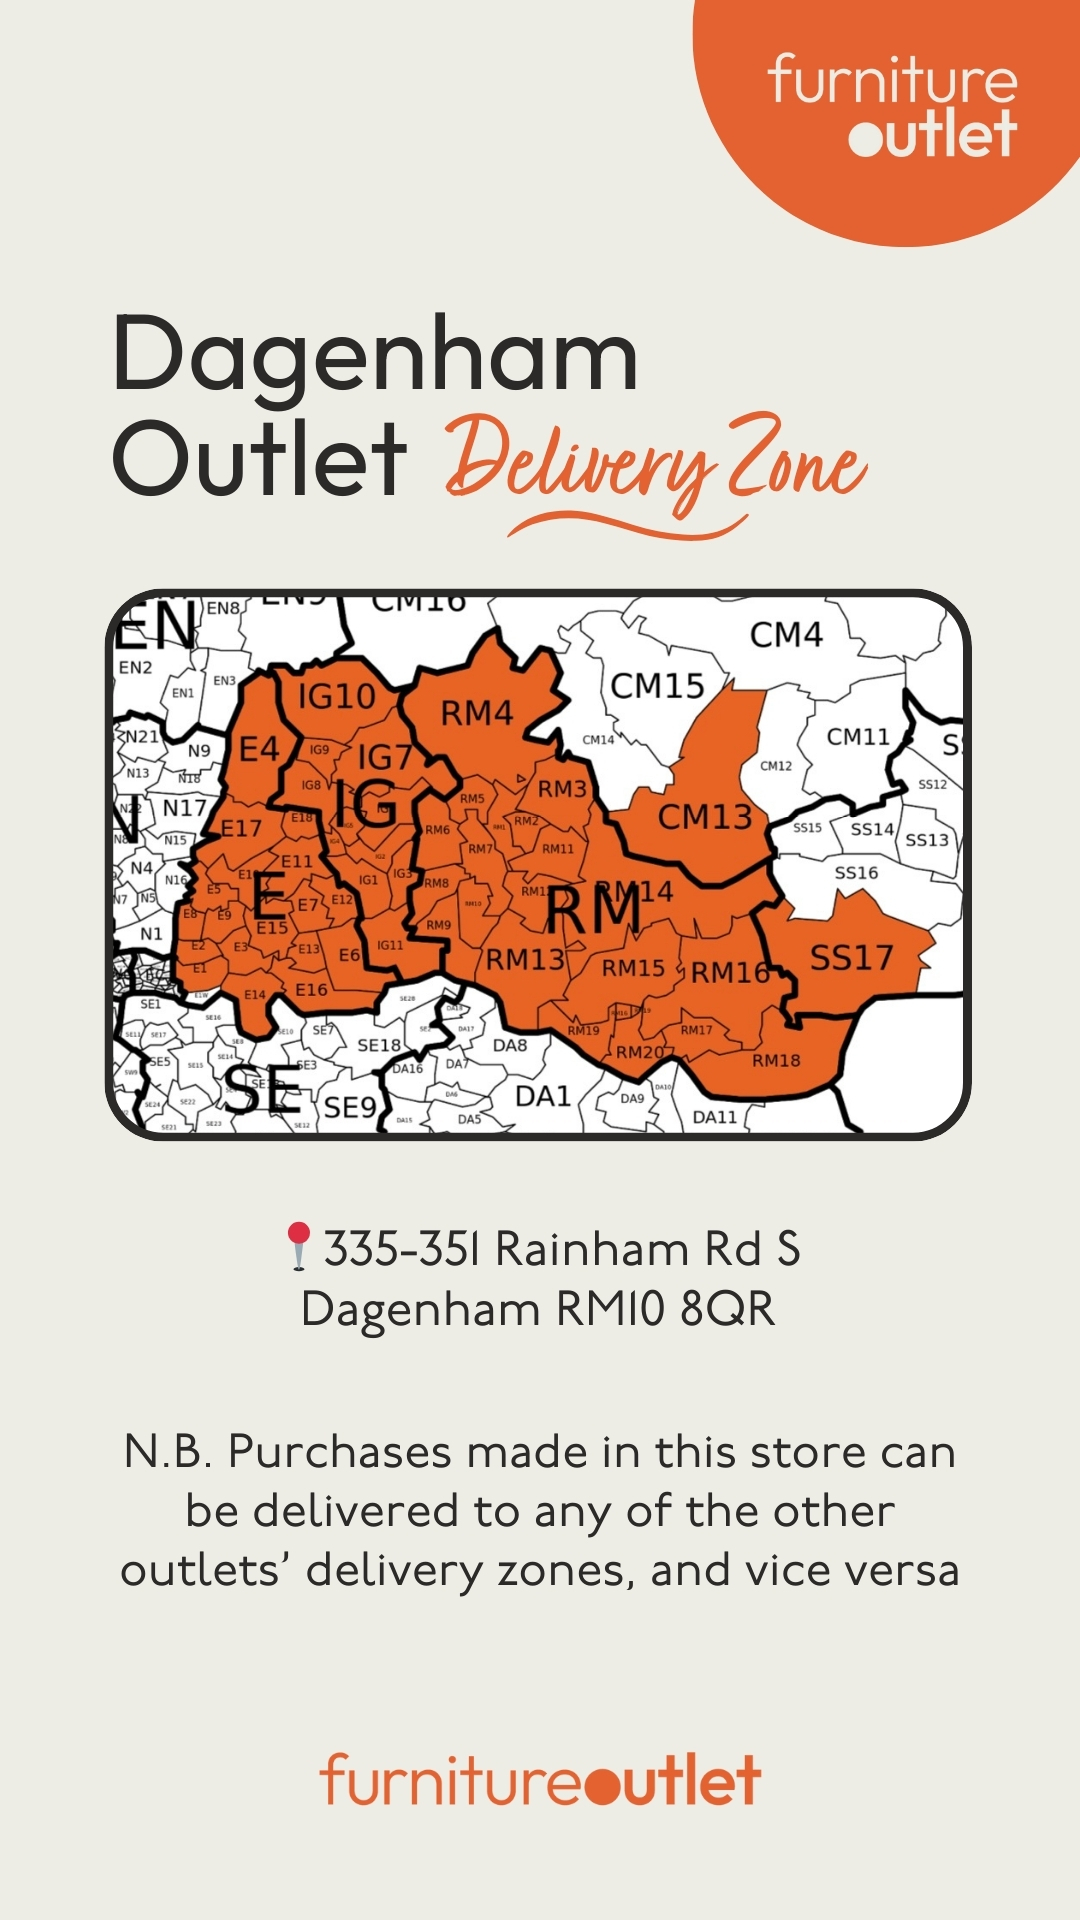 Furniture Outlet Dagenham Delivery Zone Map